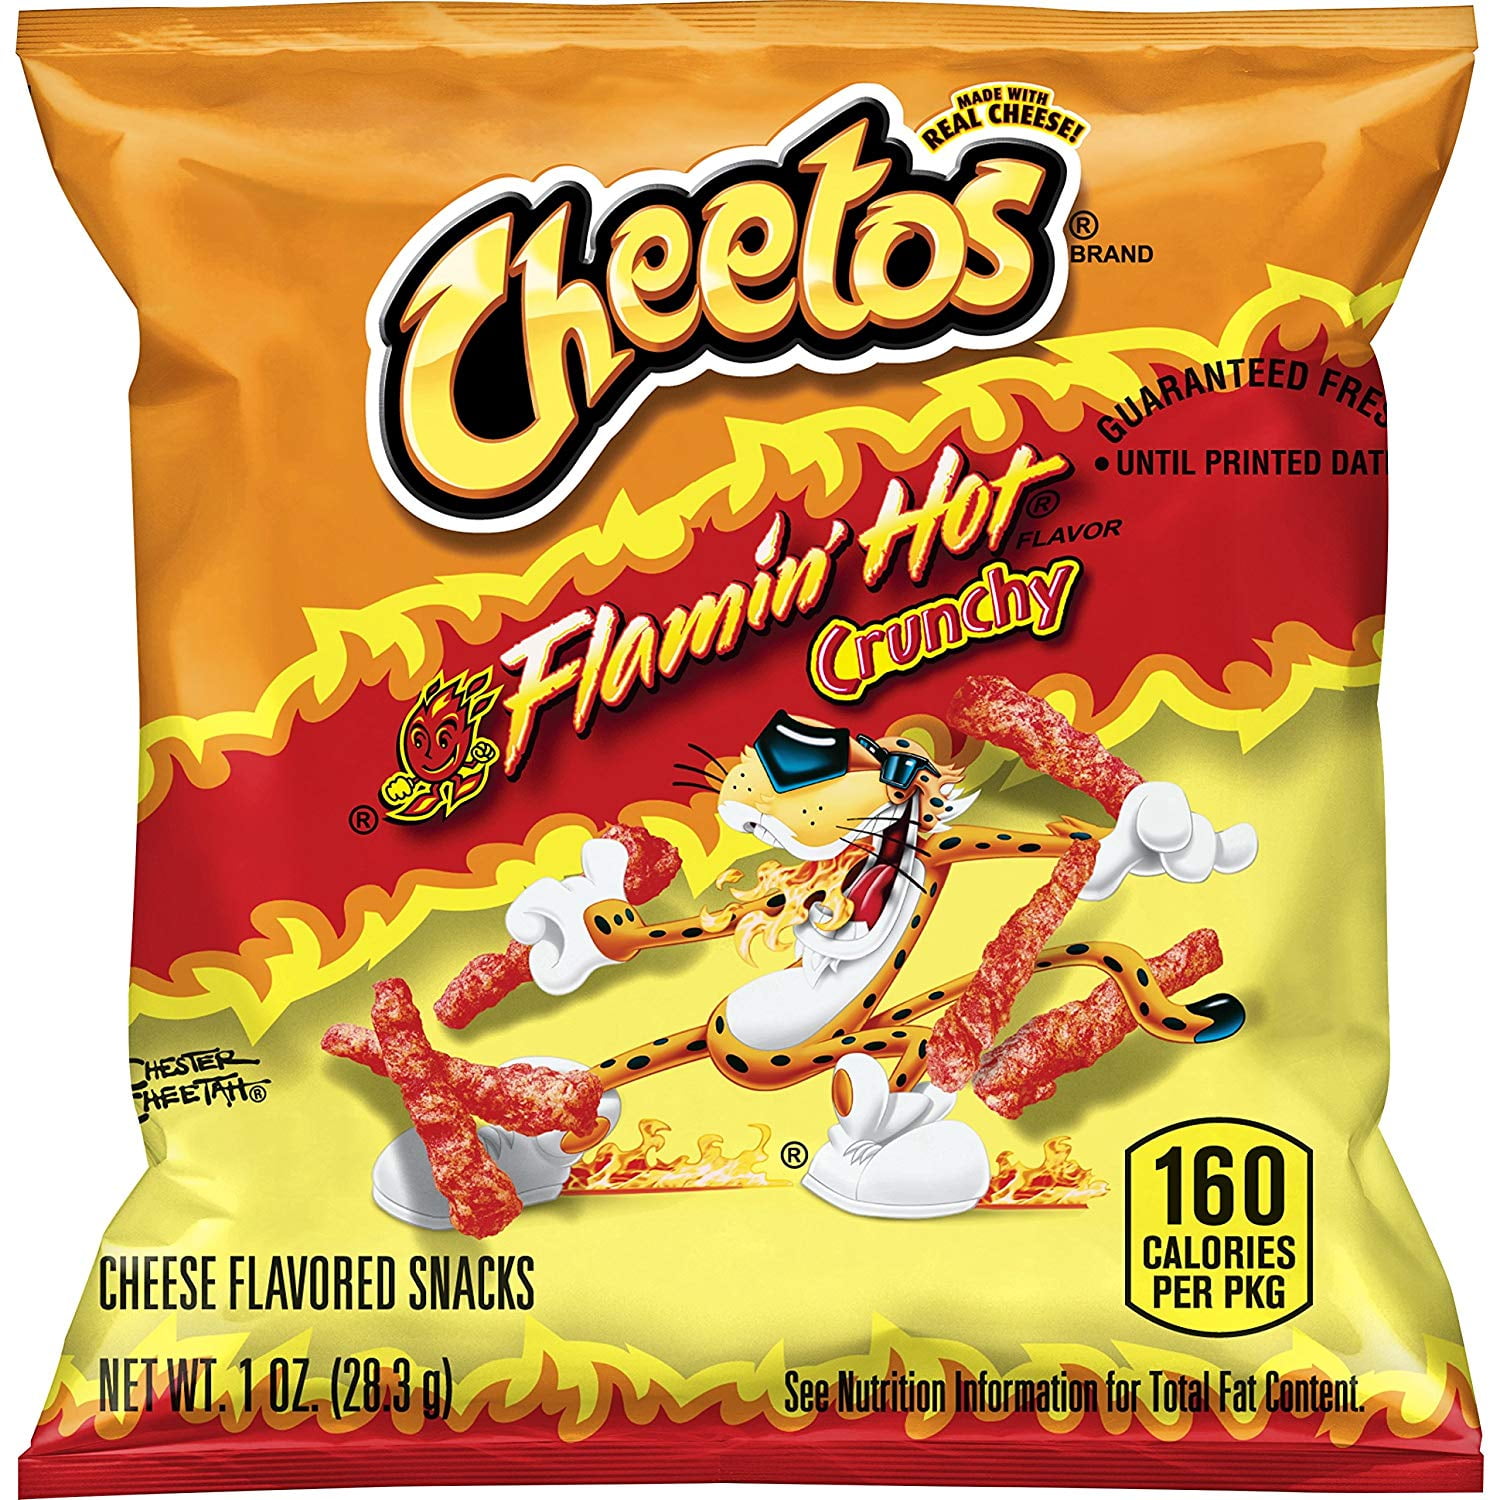 Cheetos Crunchy Flamin Hot Cheese Flavored Snacks 1 Oz Bags 40 Count